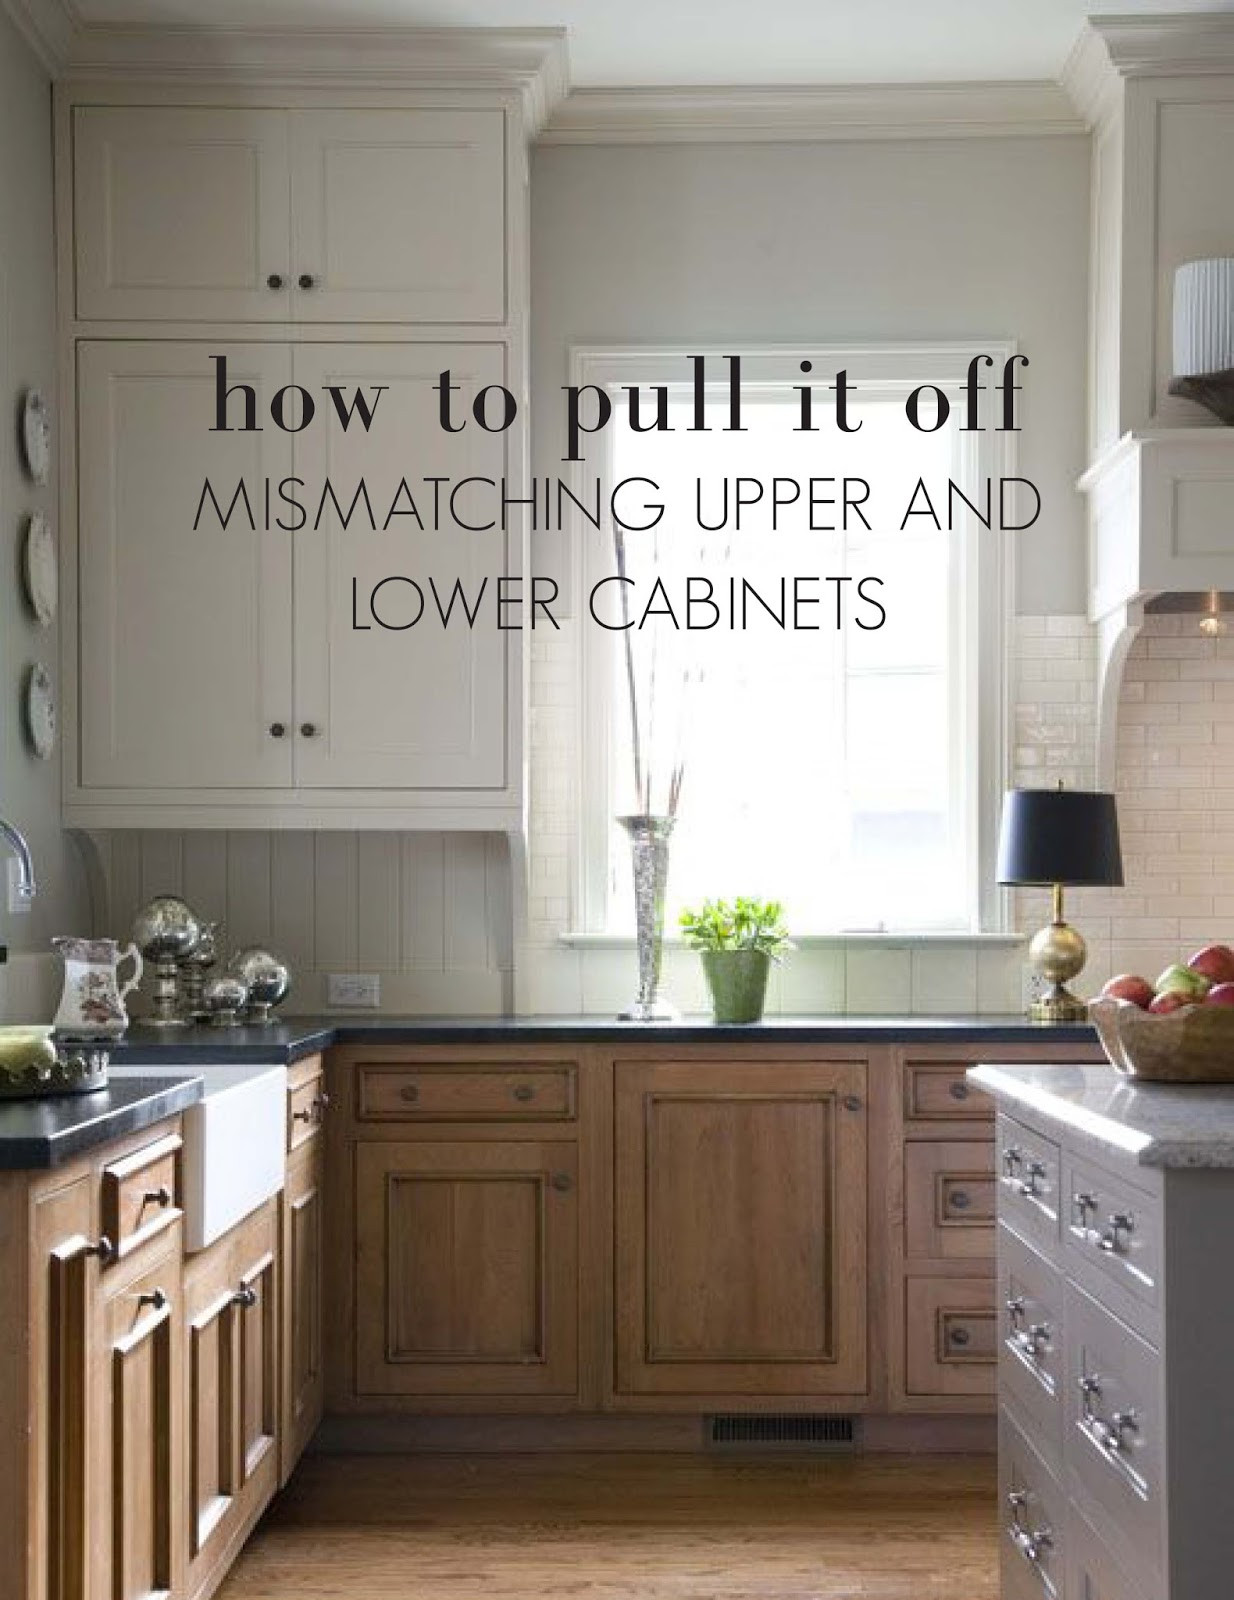 Lowering Kitchen Cabinets
 Mismatching Upper & Lower Cabinets How to pull it off